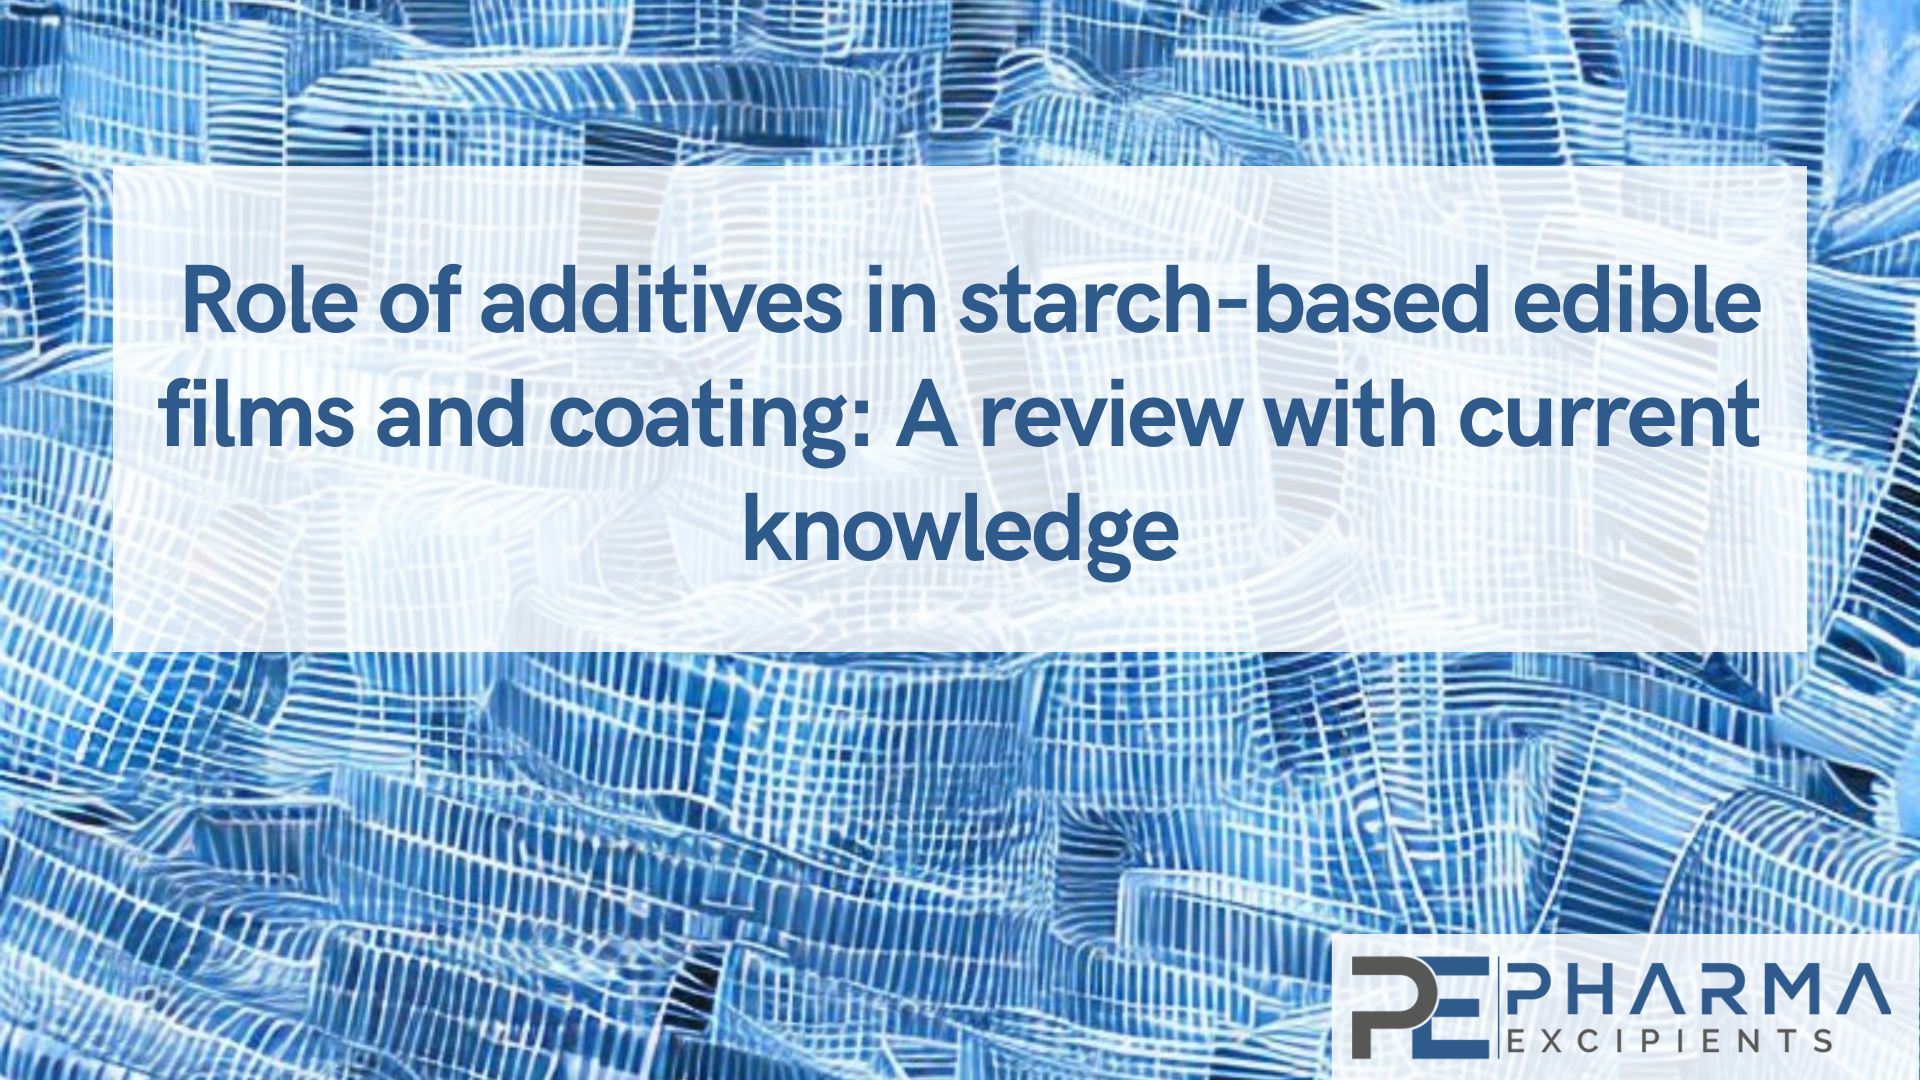 Role of additives in starch-based edible films and coating_A review with current knowledge